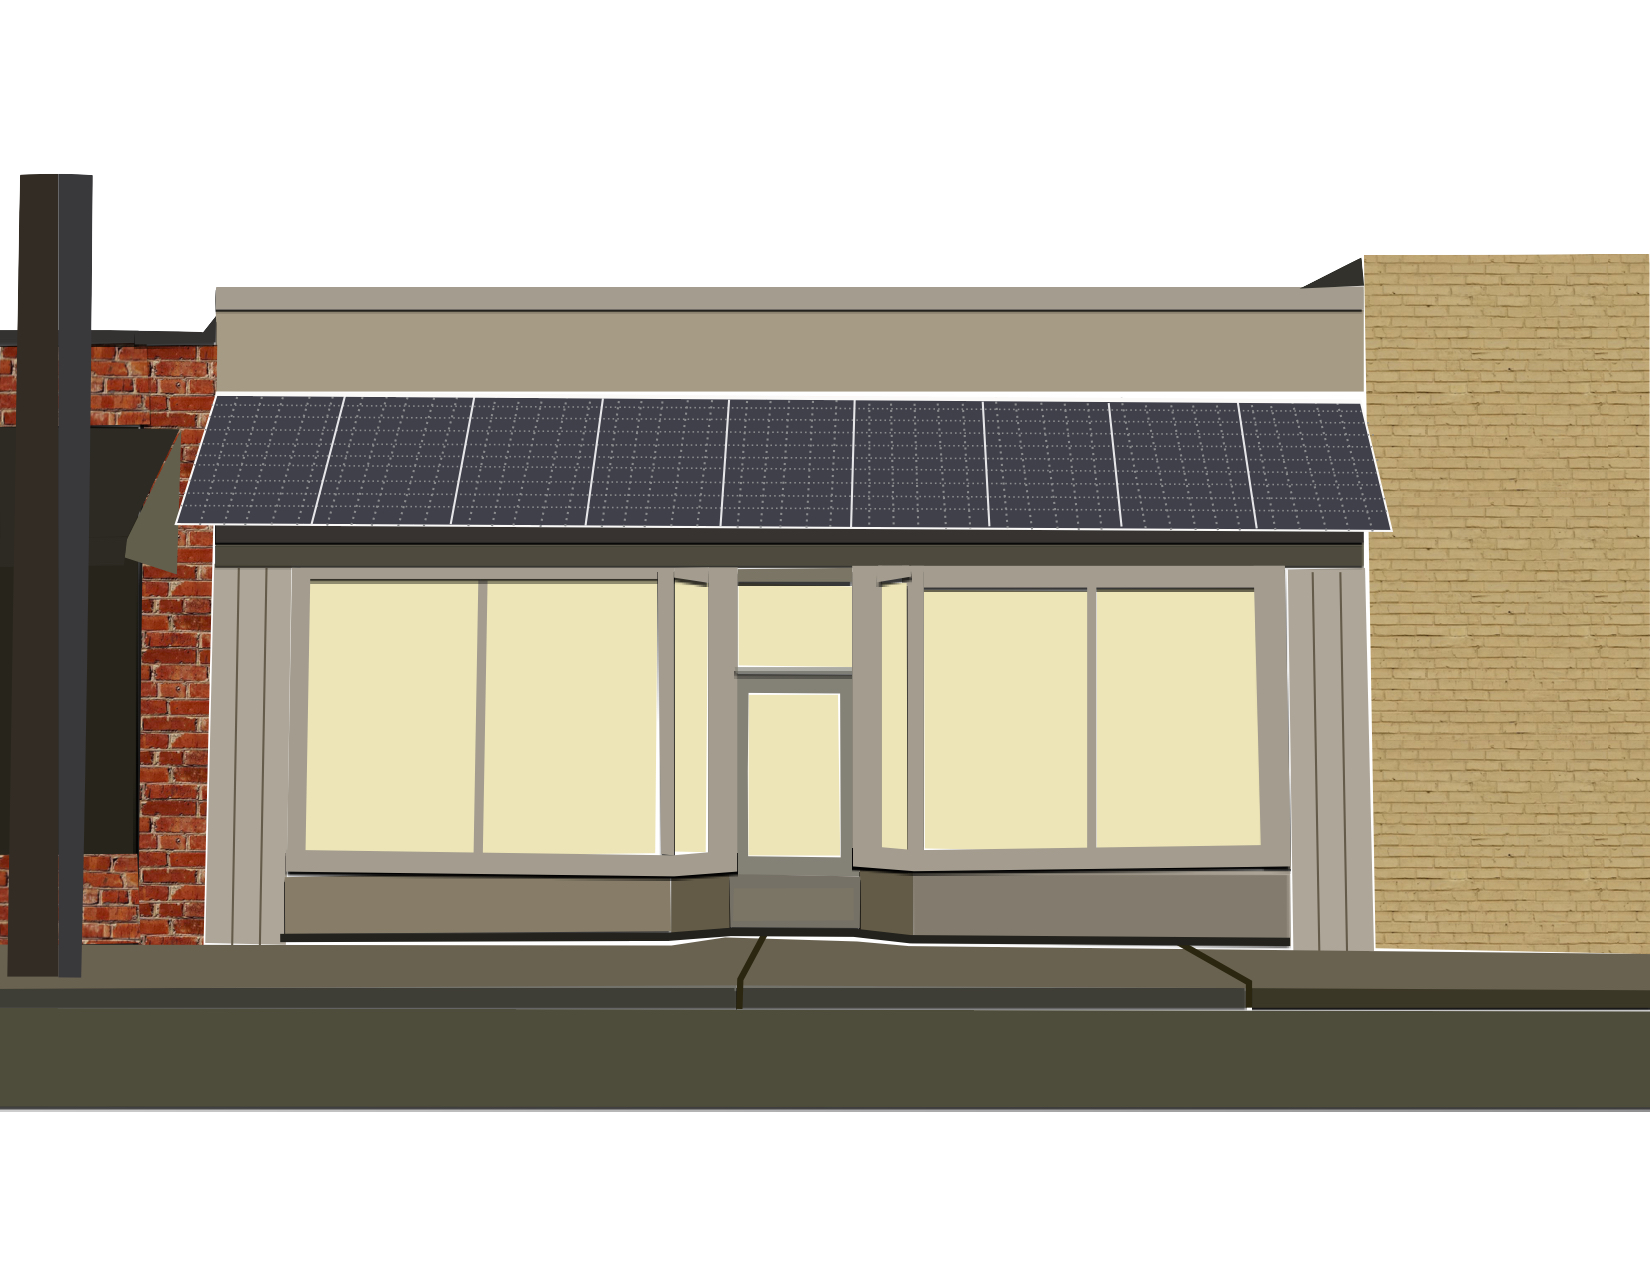 The shape, size and durability of solar panels make them perfect as awning materials. Solar awnings are a great way to showcase a company's commitment to sustainability.